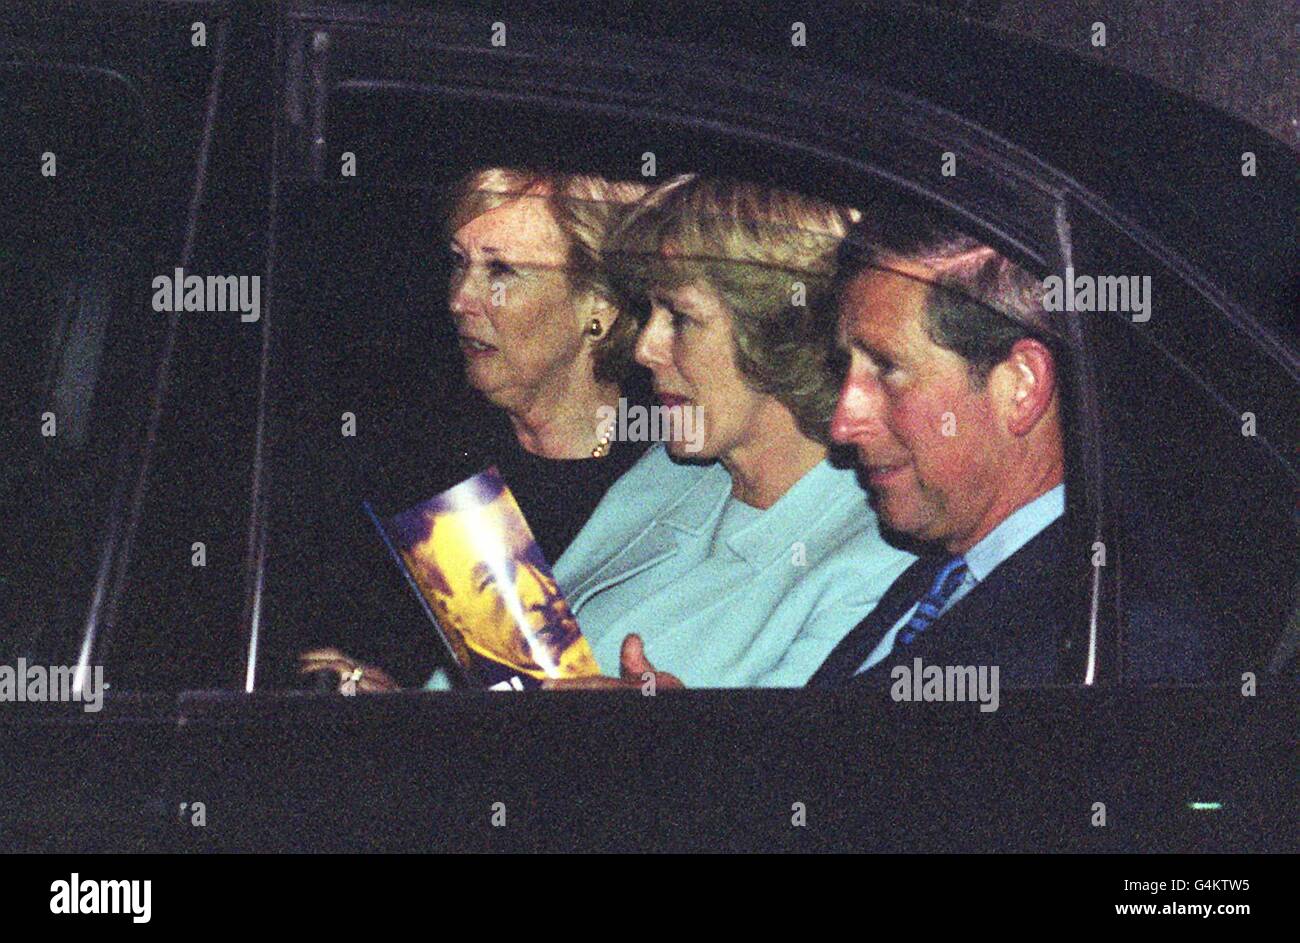 The Prince of Wales and partner Camilla Parker Bowles (centre) stepped out in public together, their third outing in nine days. The couple went to the Royal Festival Hall to attended a concert by the Philharmonia Orchestra, featuring a recital by Evgeny Kissin. * of Rachmaninov s Piano Concerto No 2. Stock Photo